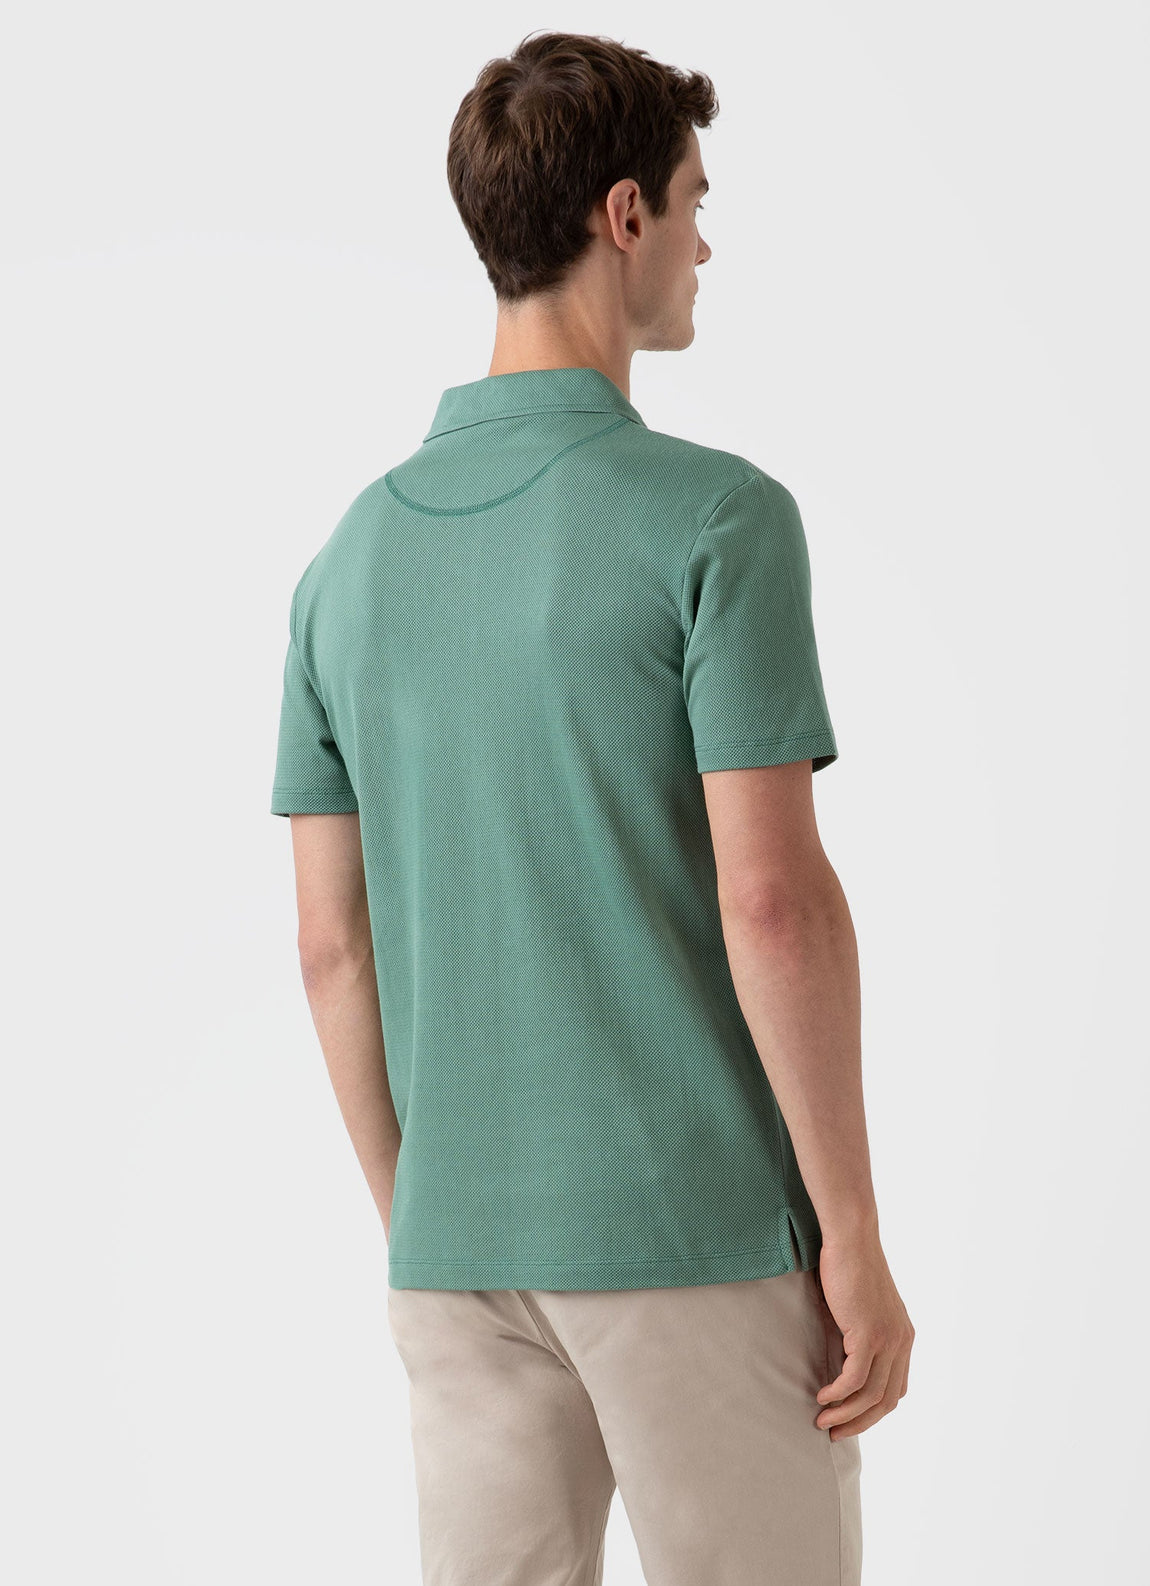 Men's Riviera Polo Shirt in Thyme